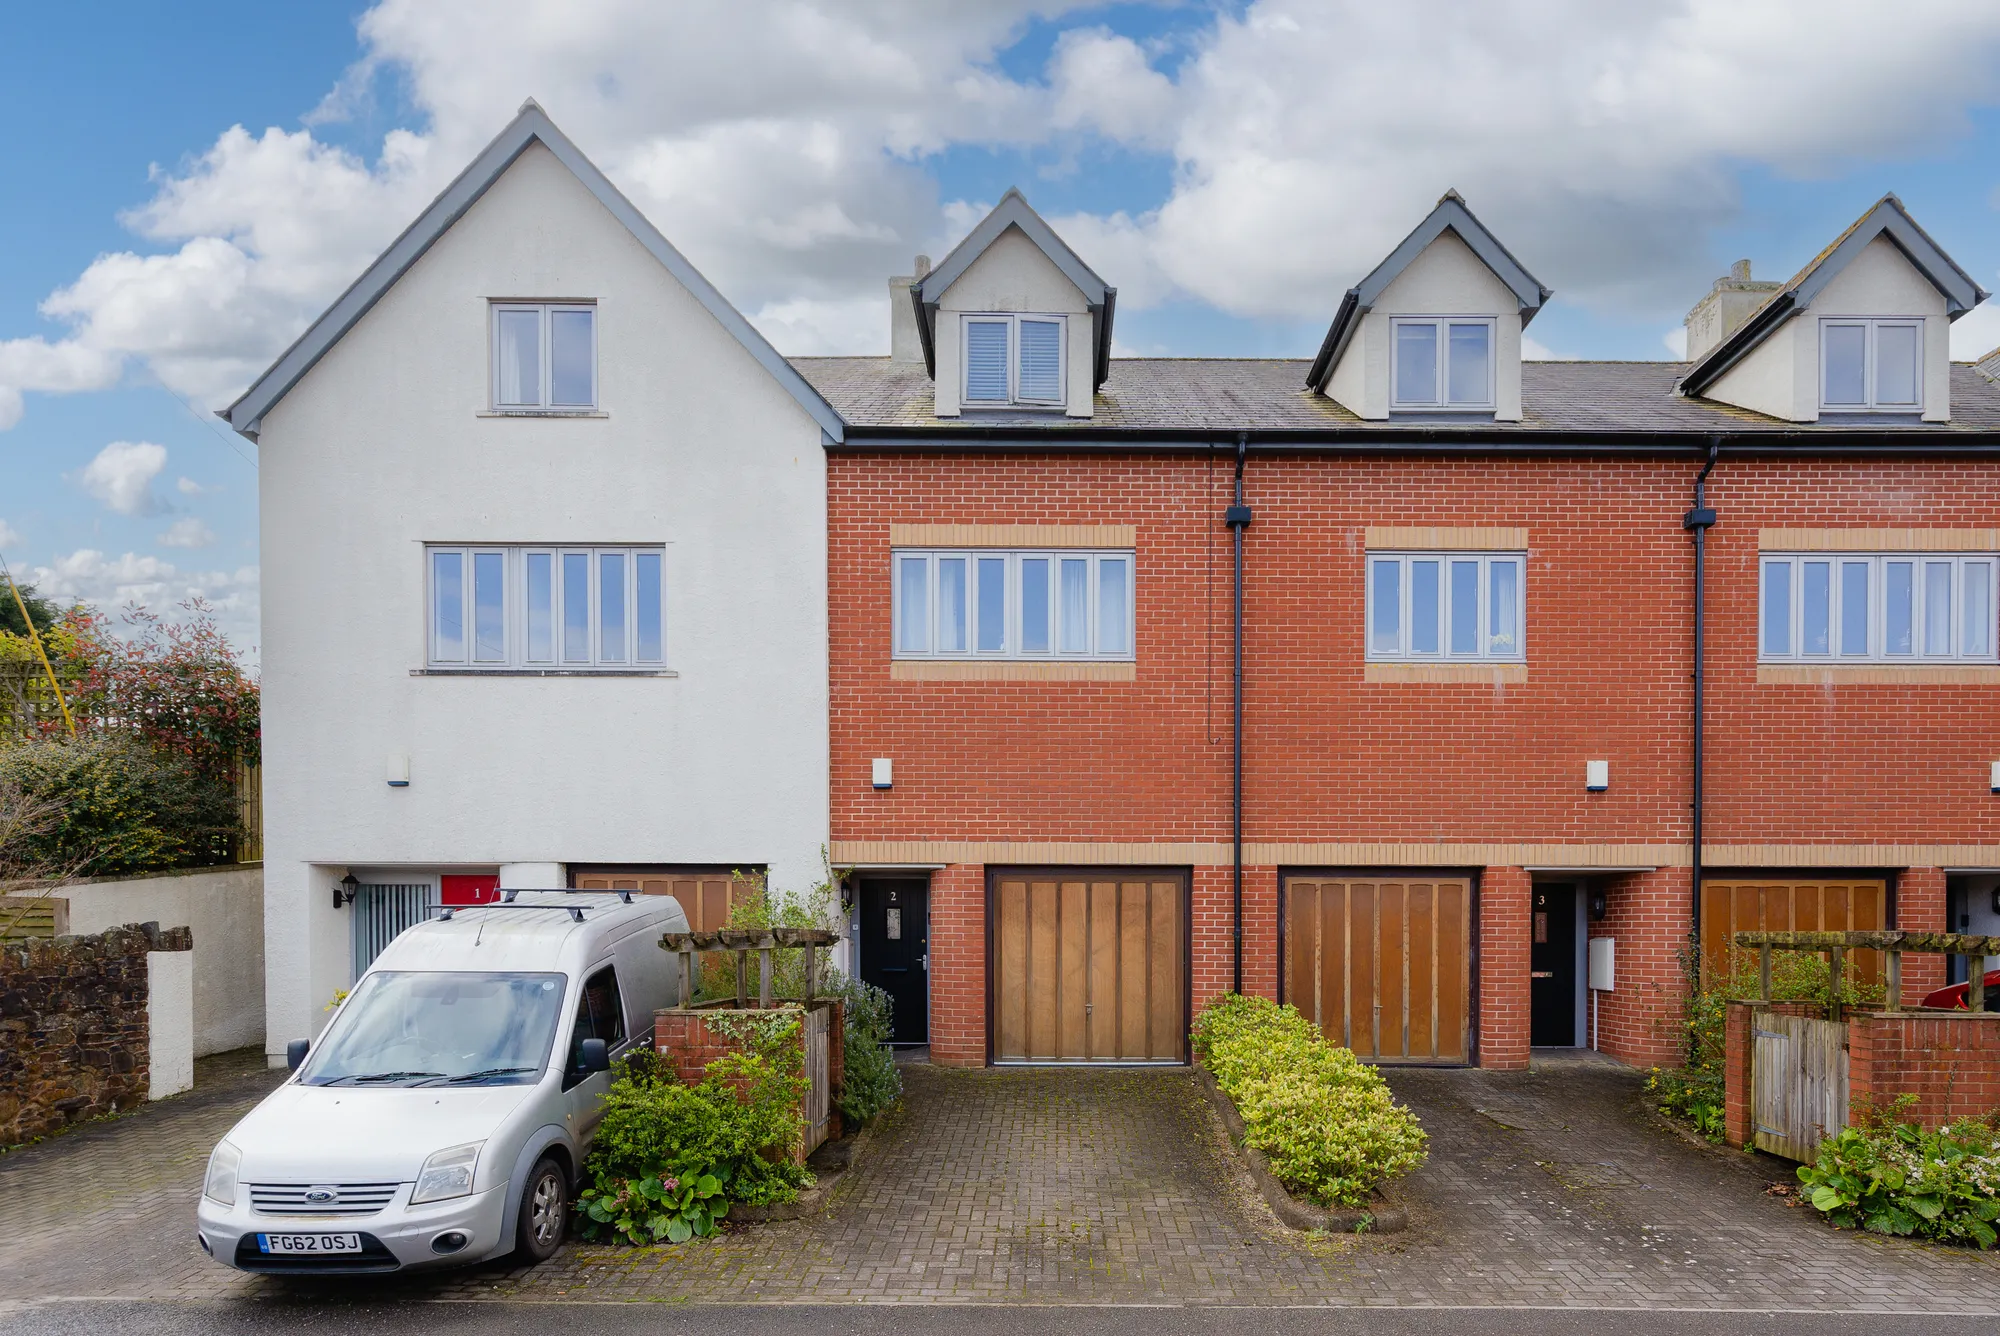 3 bed mid-terraced house for sale in Landscore, Crediton  - Property Image 1